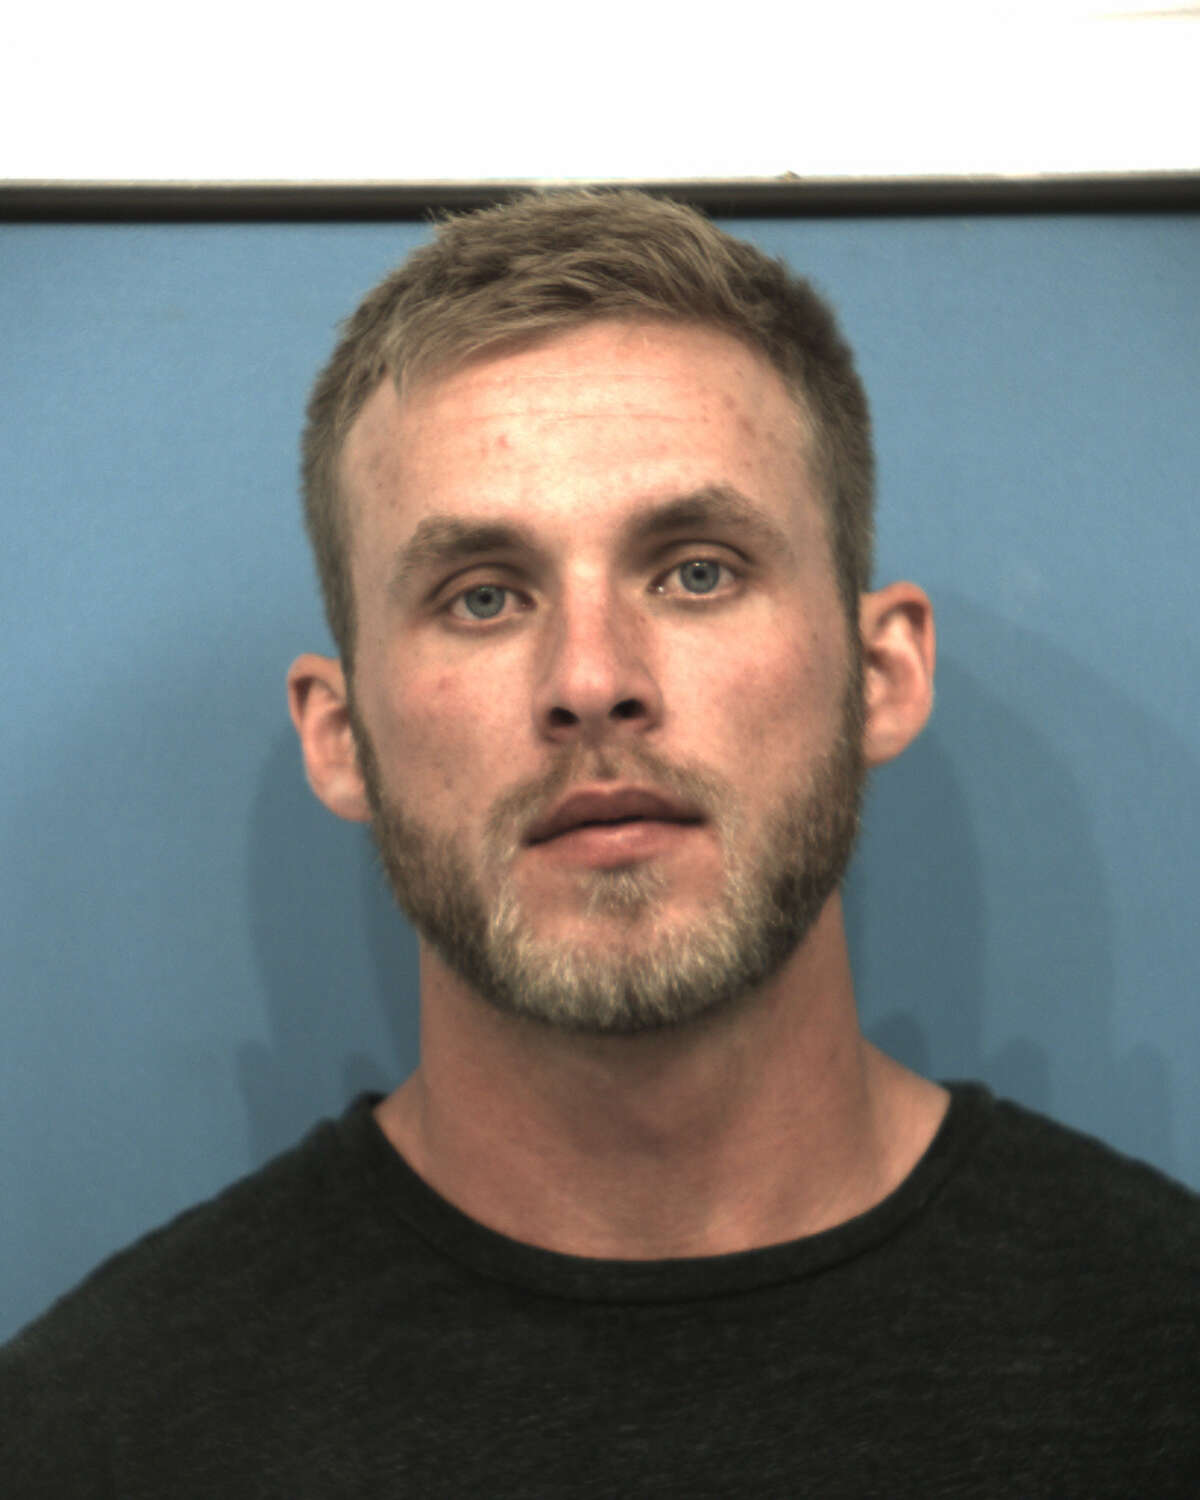 Jake Fenske, who is listed as a football and track coach and science teacher on Hutto High School's website, was charged with improper relationship between educator and student Friday. He was released the same day after posting $20,000 bond.